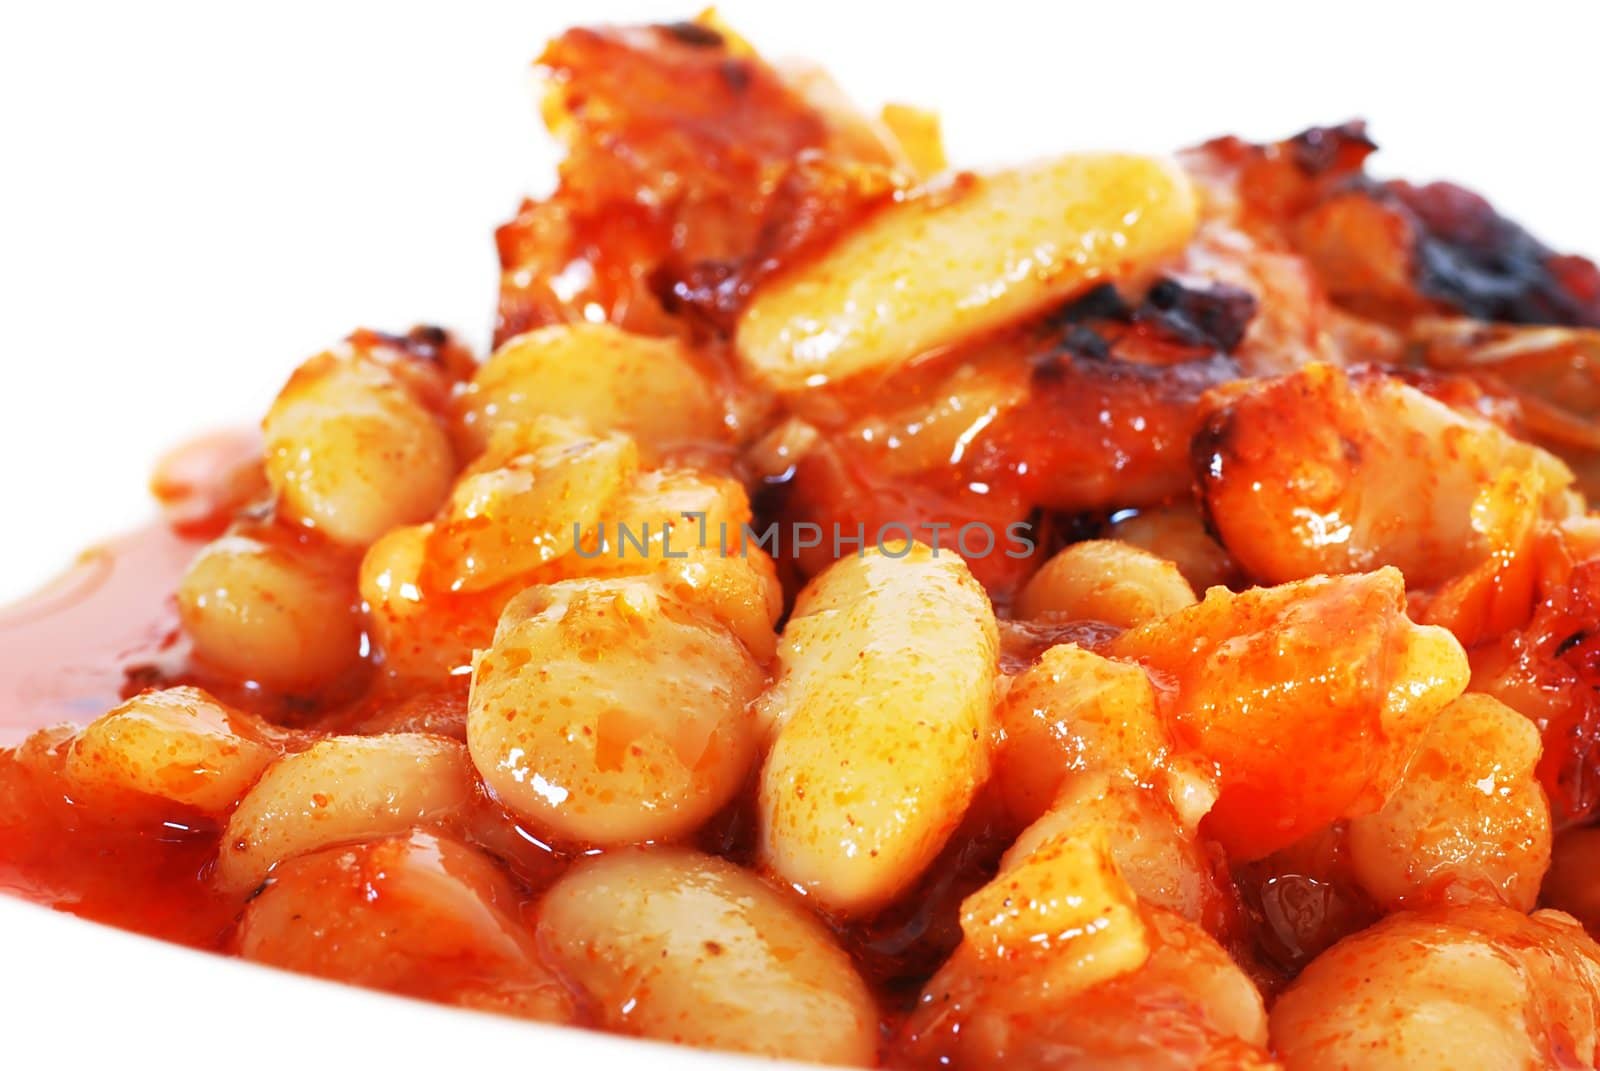 Bean dish by simply